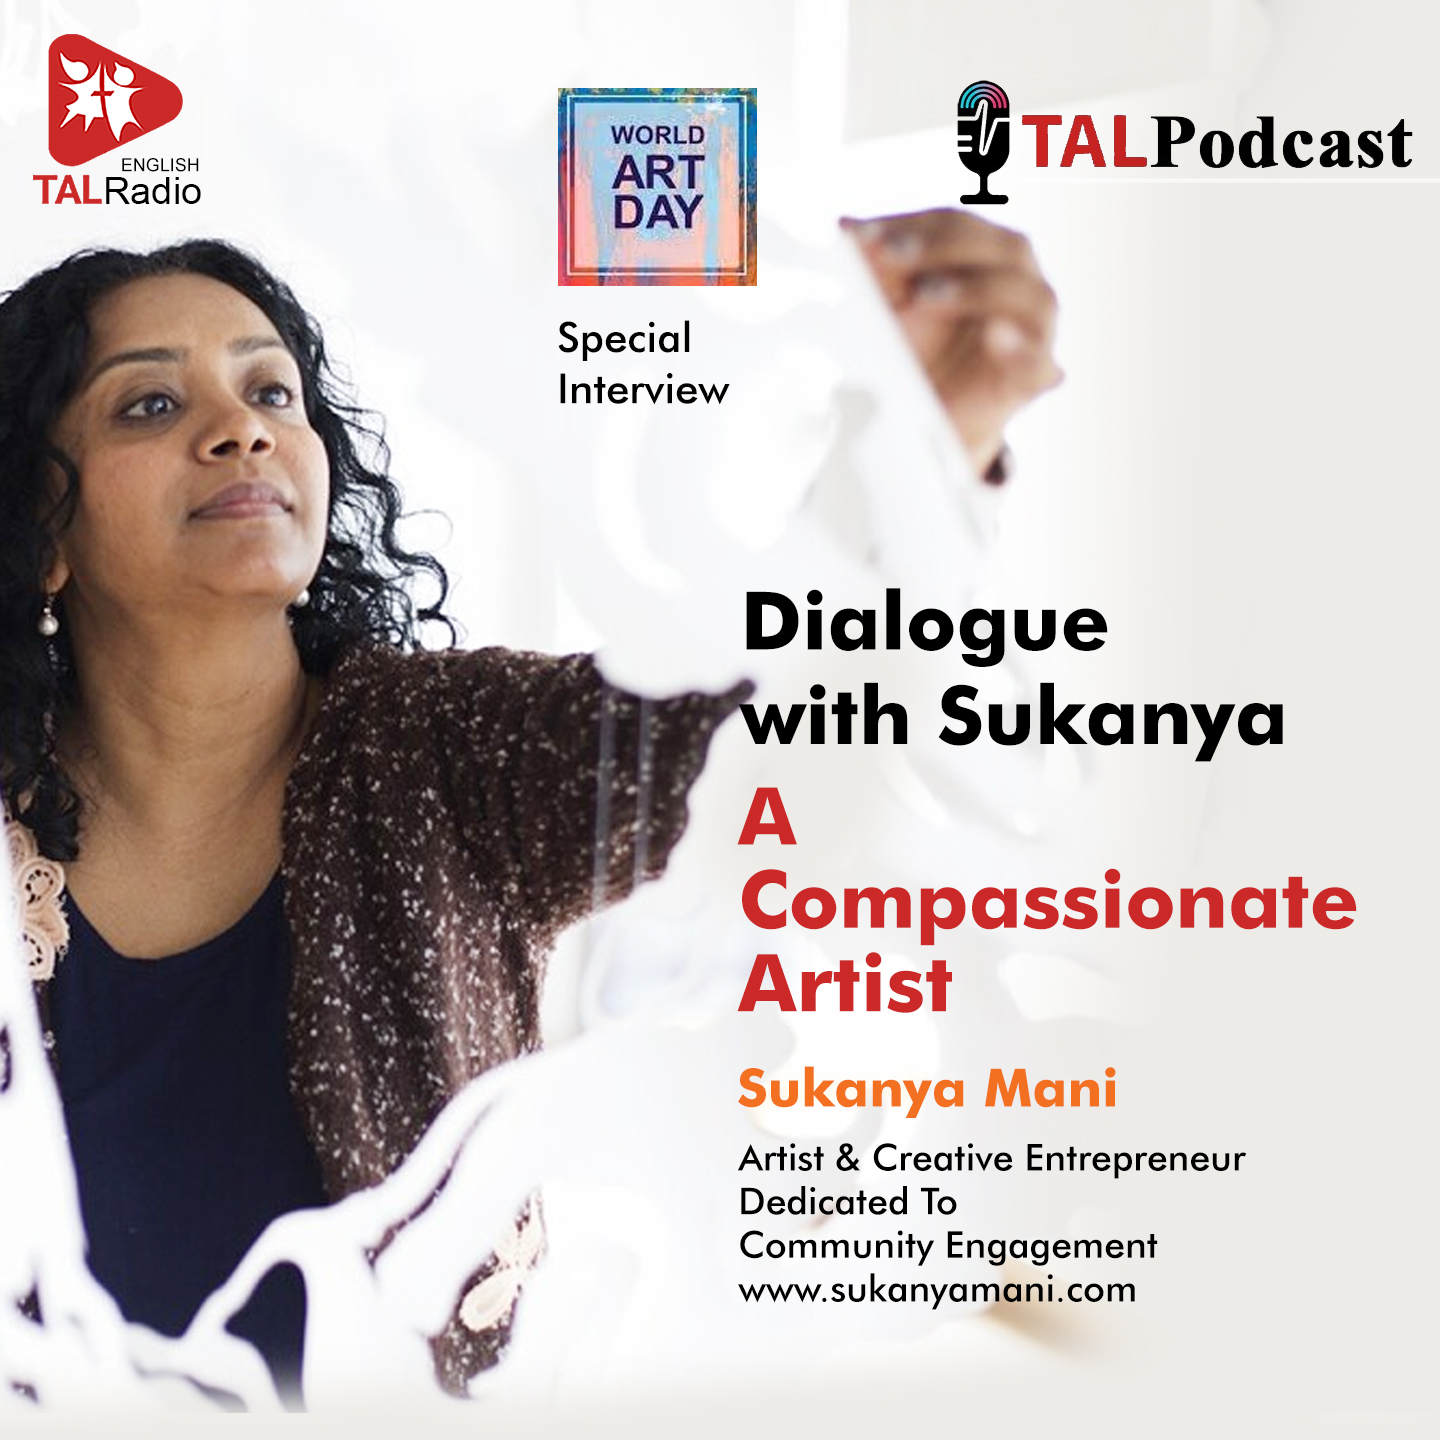 Dialogue with Sukanya - A Compassionate Artist | World Art Day Special